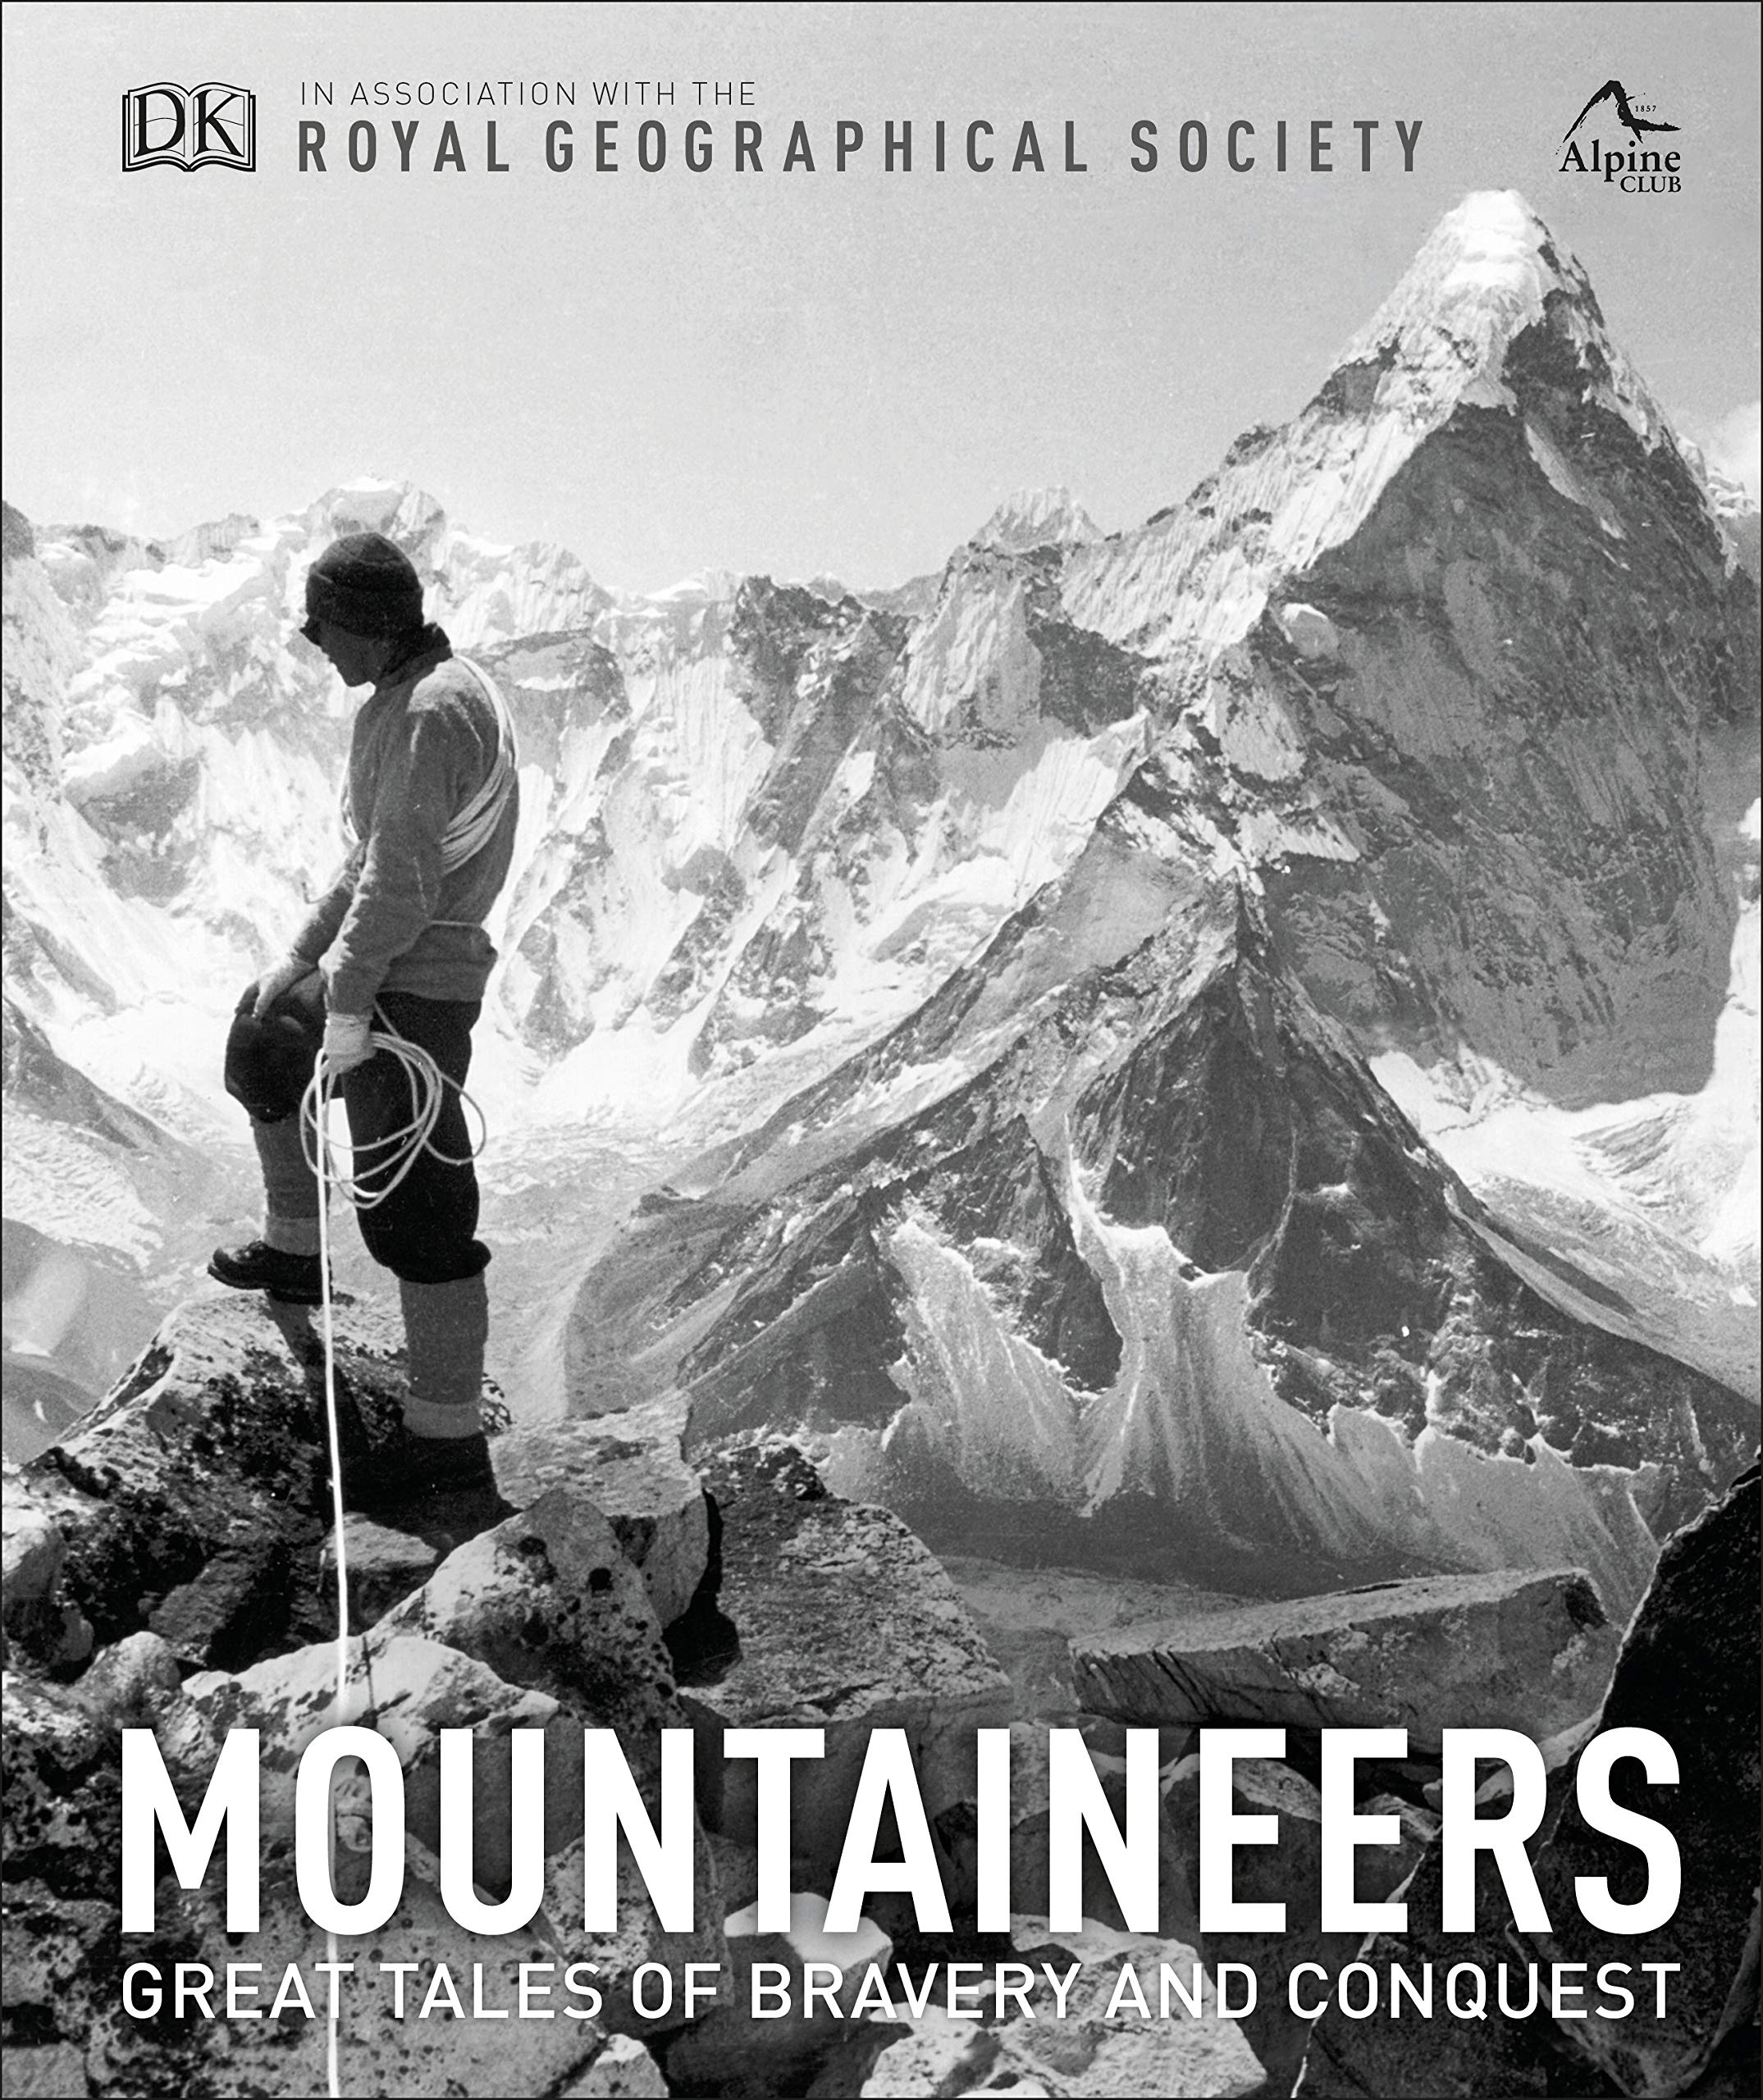 Mountaineers | Royal Geographical Society, The Alpine Club